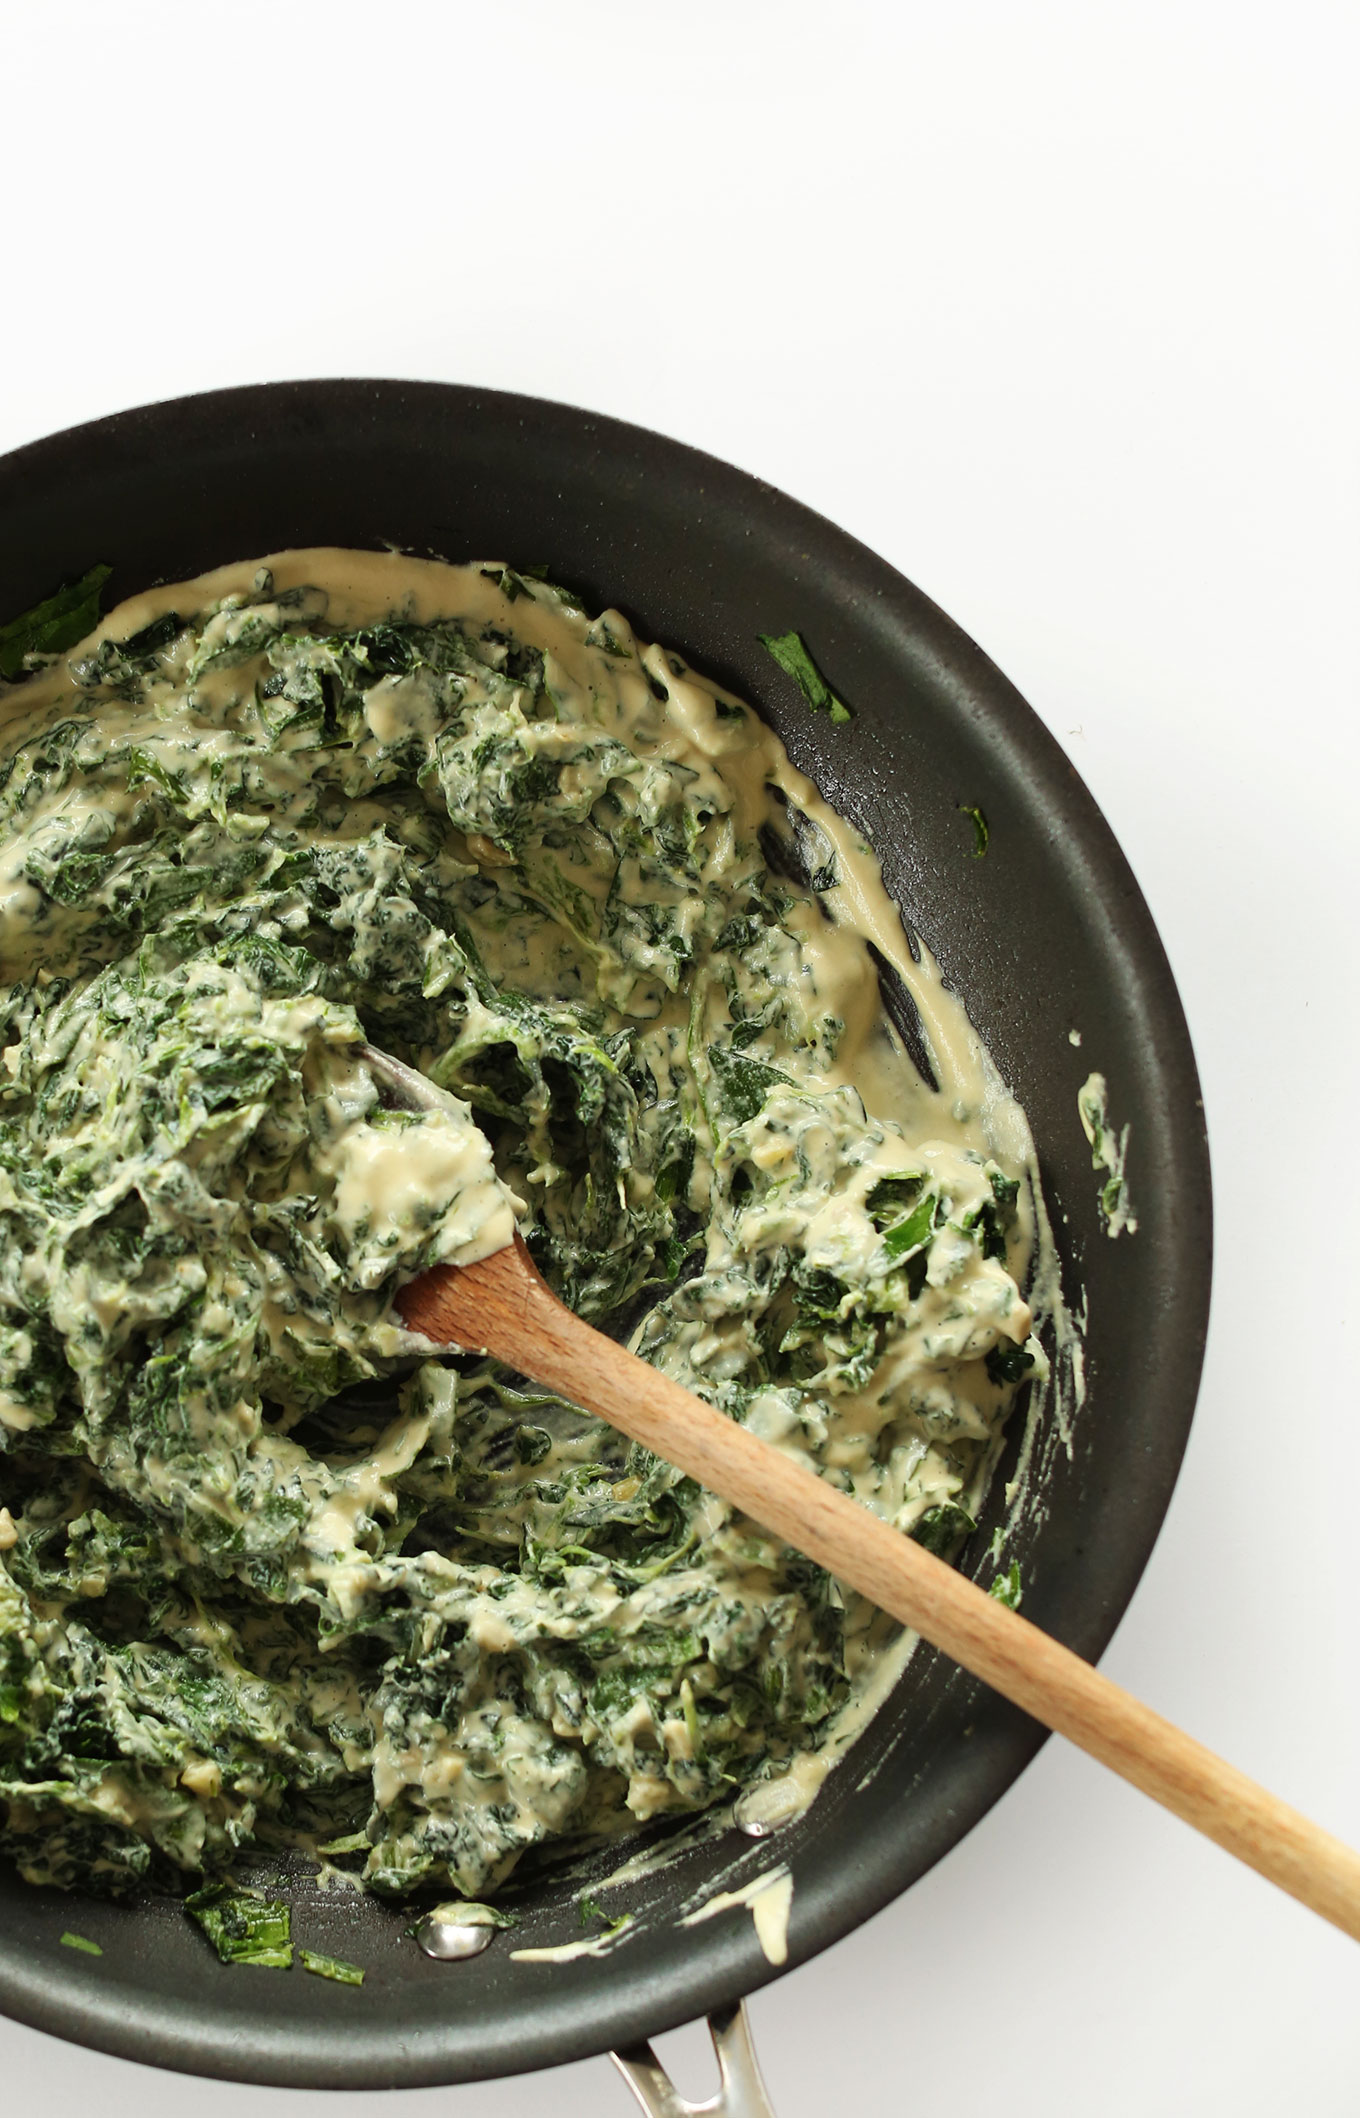 Stirring together our vegan Kale and Spinach Dip recipe in a skillet